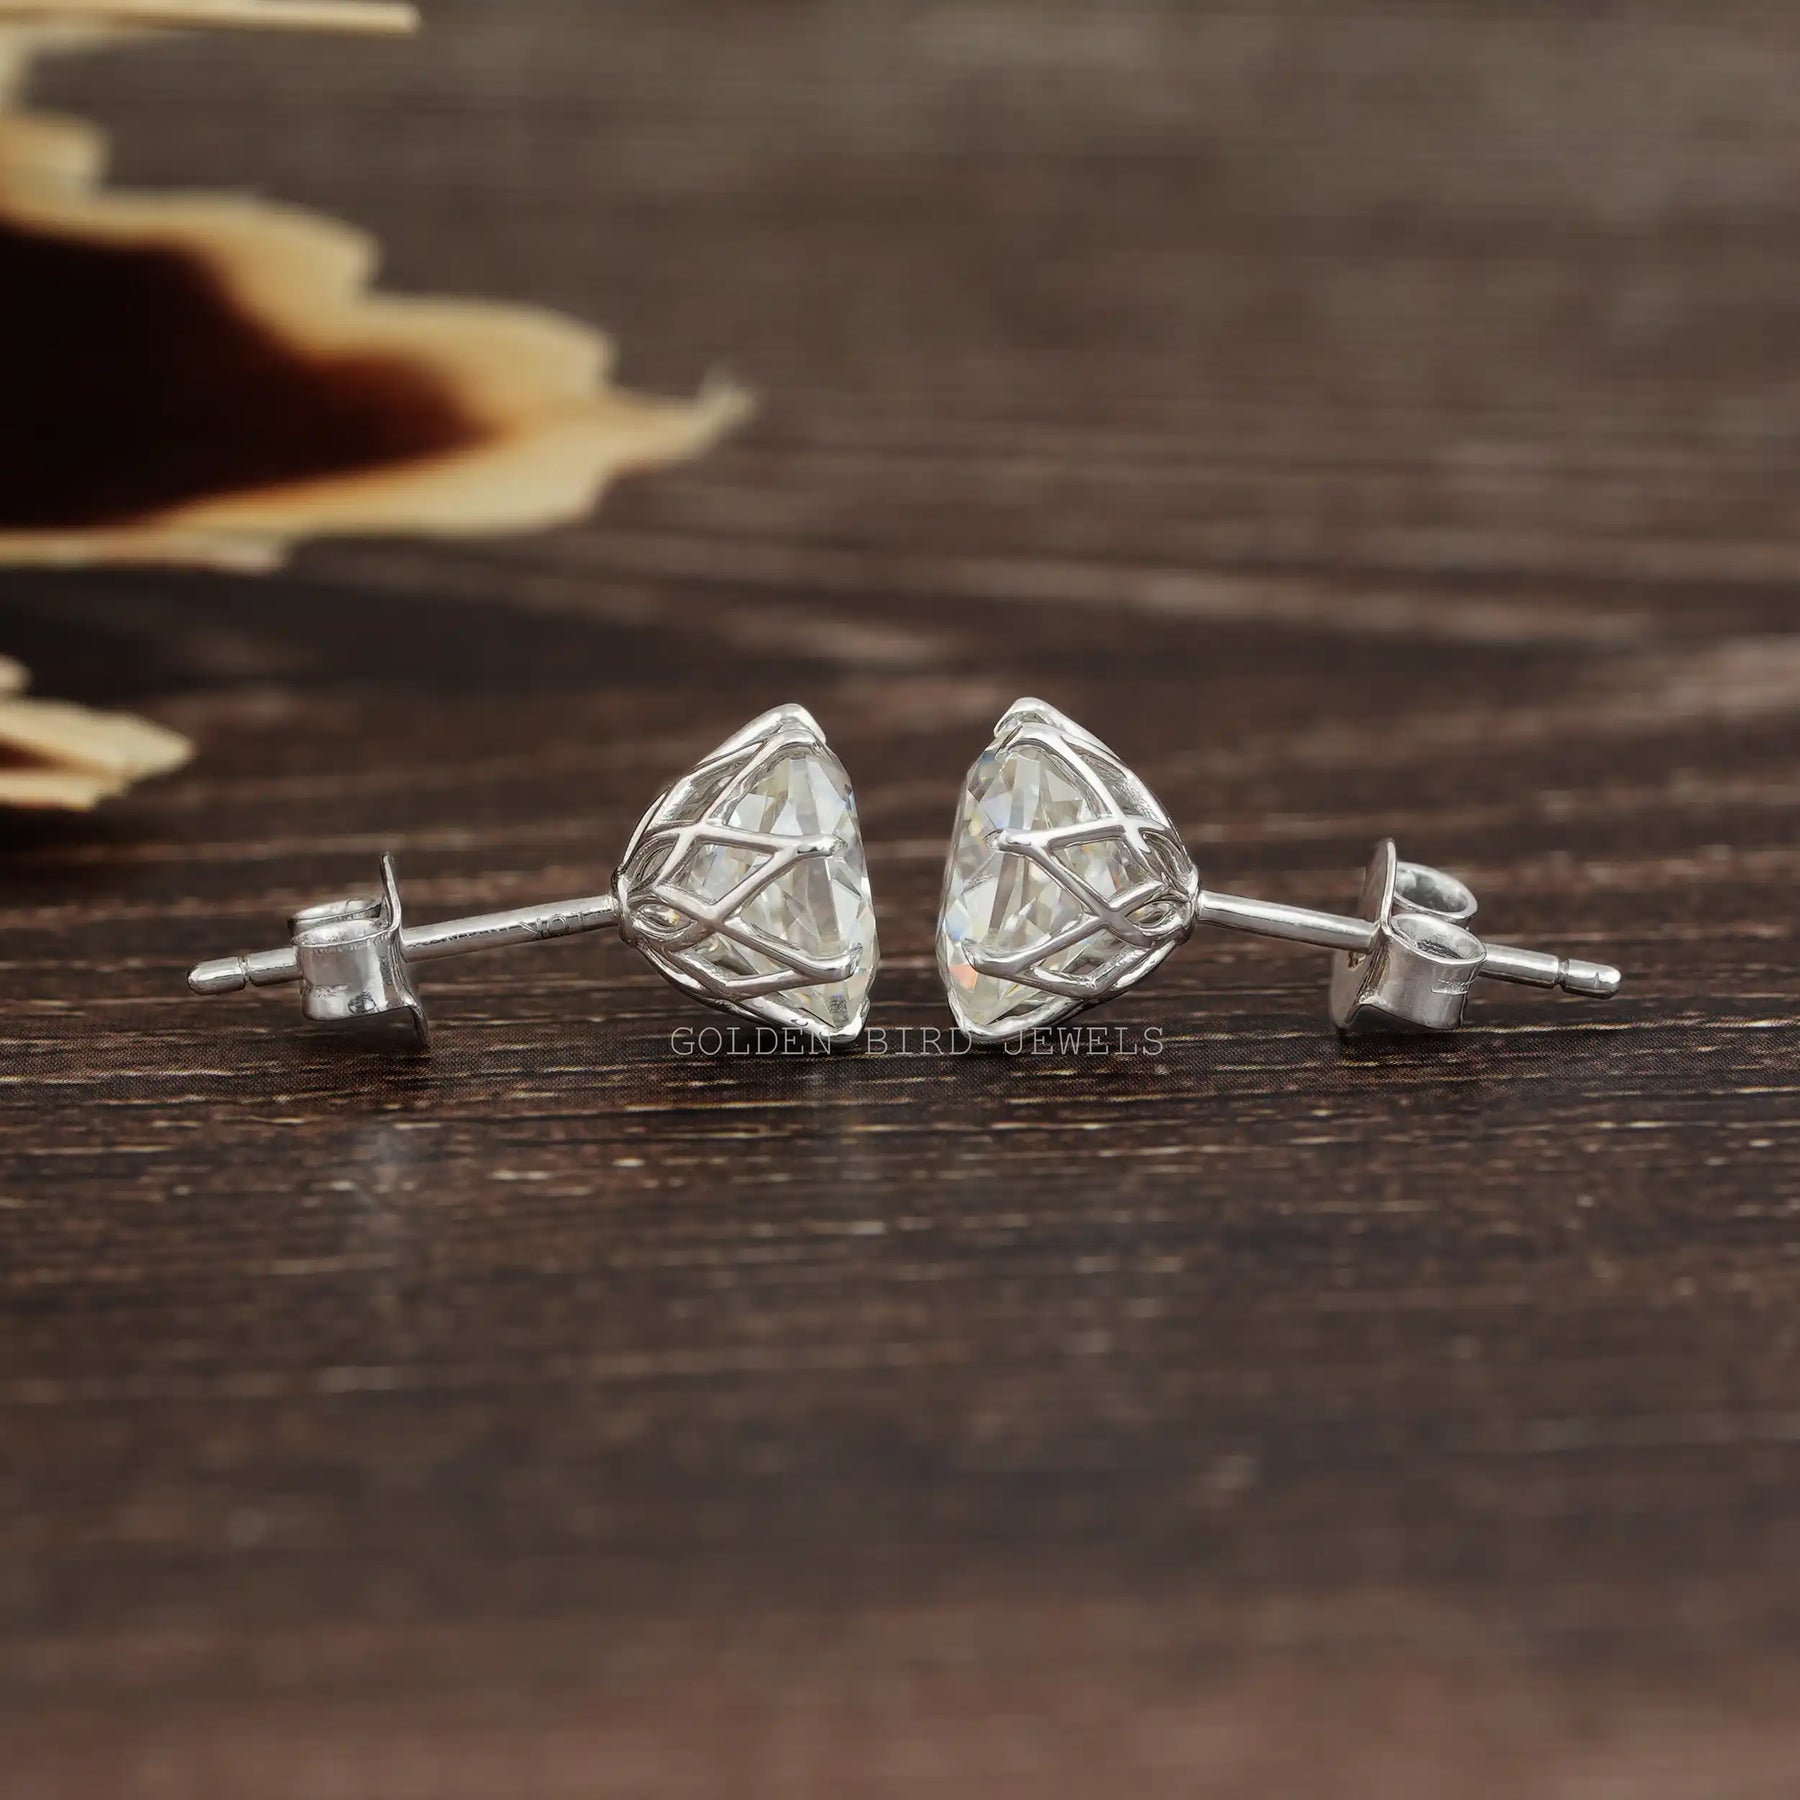 [Moissanie Octagon Stud Earrings Made Of White Gold]-[Golden Bird Jewels]